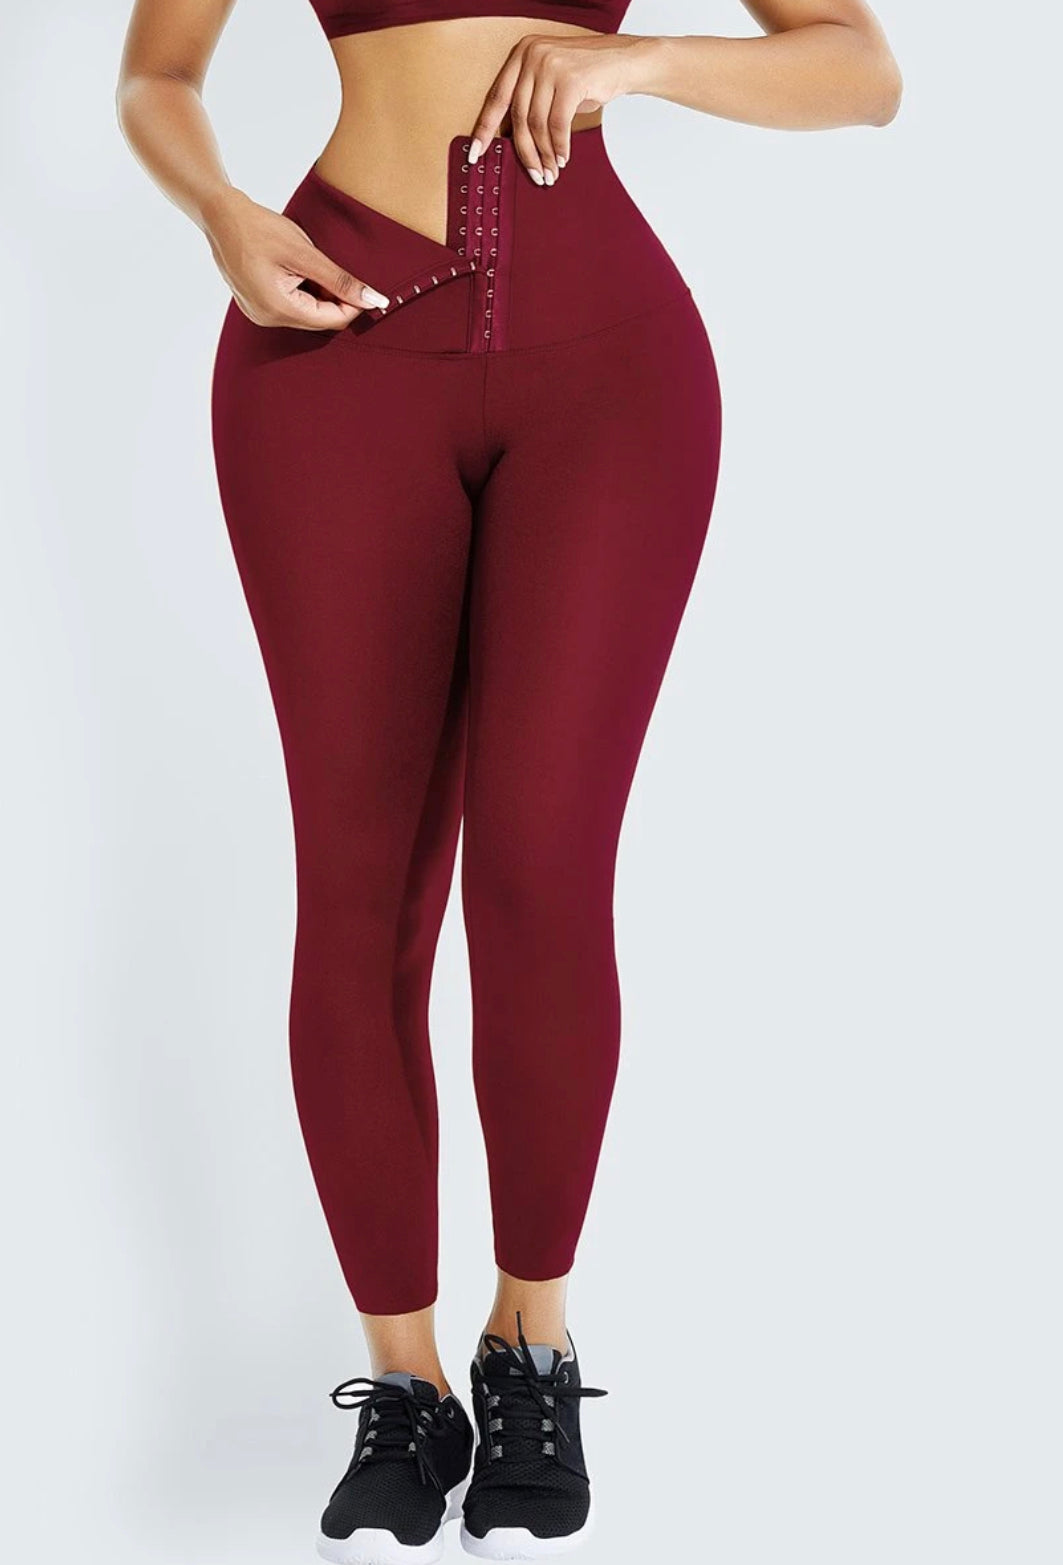 Wine Color High Waist Shaper Firm Control Leggings Tight Fitting